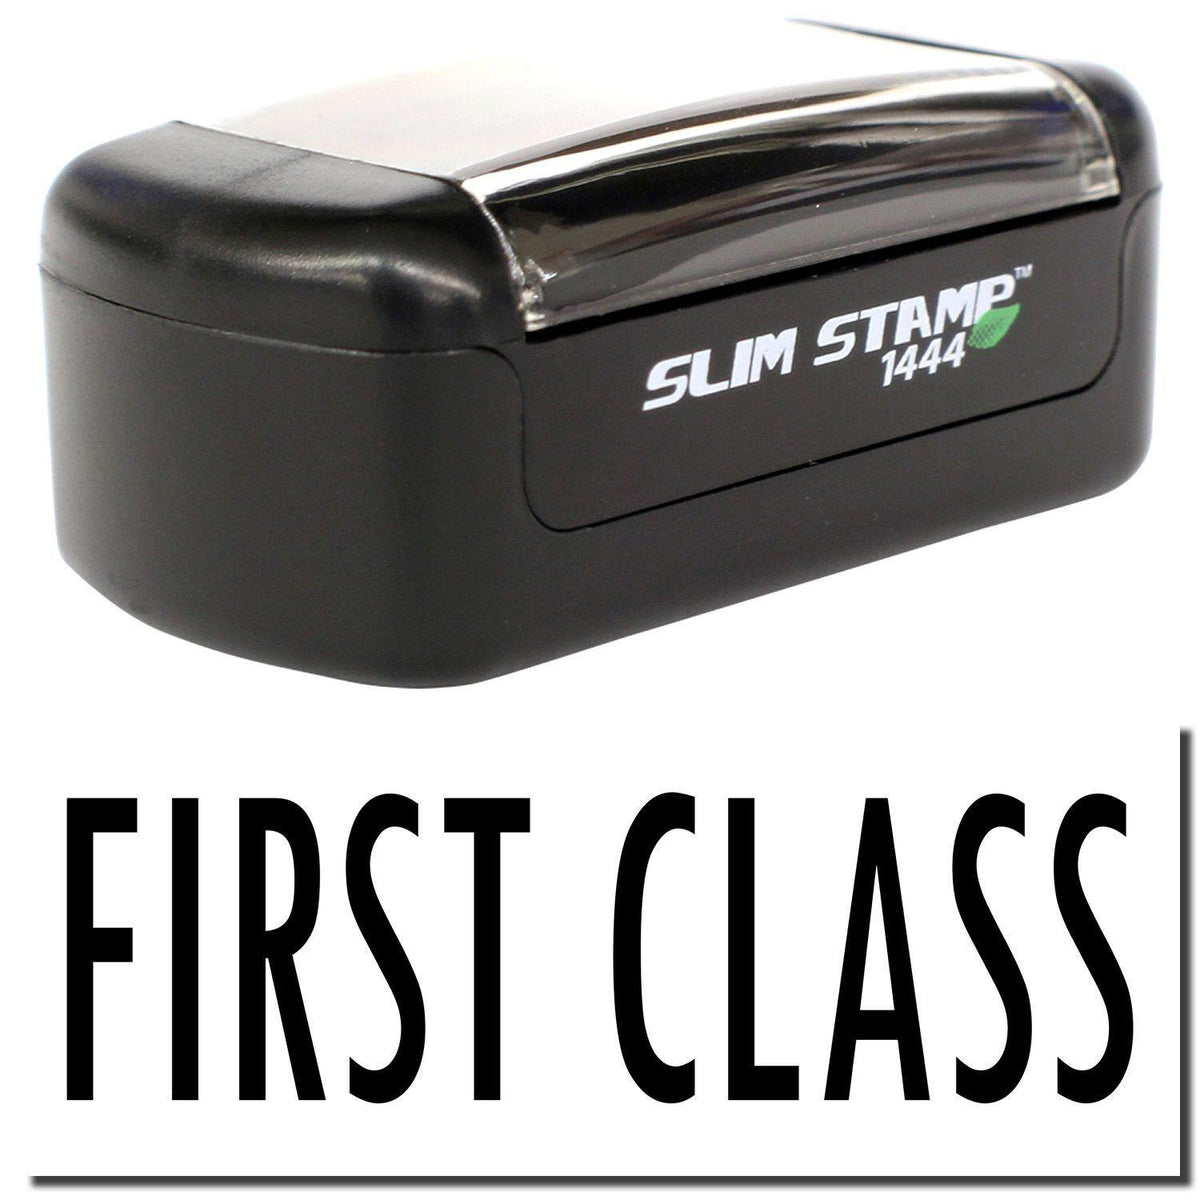 A stock office pre-inked stamp with a stamped image showing how the text &quot;FIRST CLASS&quot; is displayed after stamping.